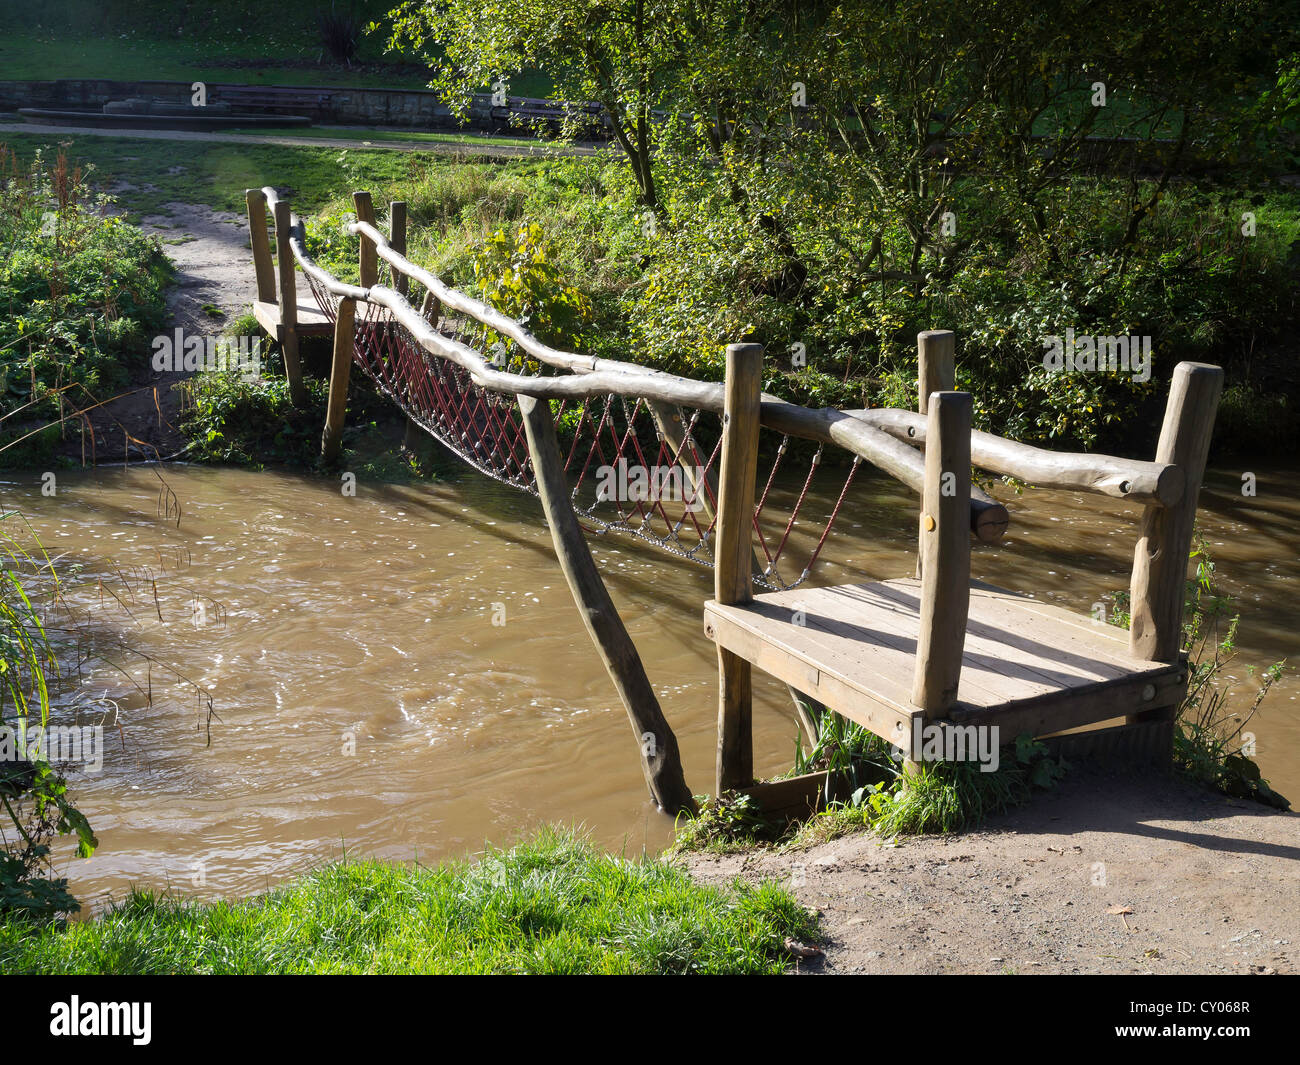 A foot bridge across a stream with the footway being a single suspended chain for amusement of children Stock Photo